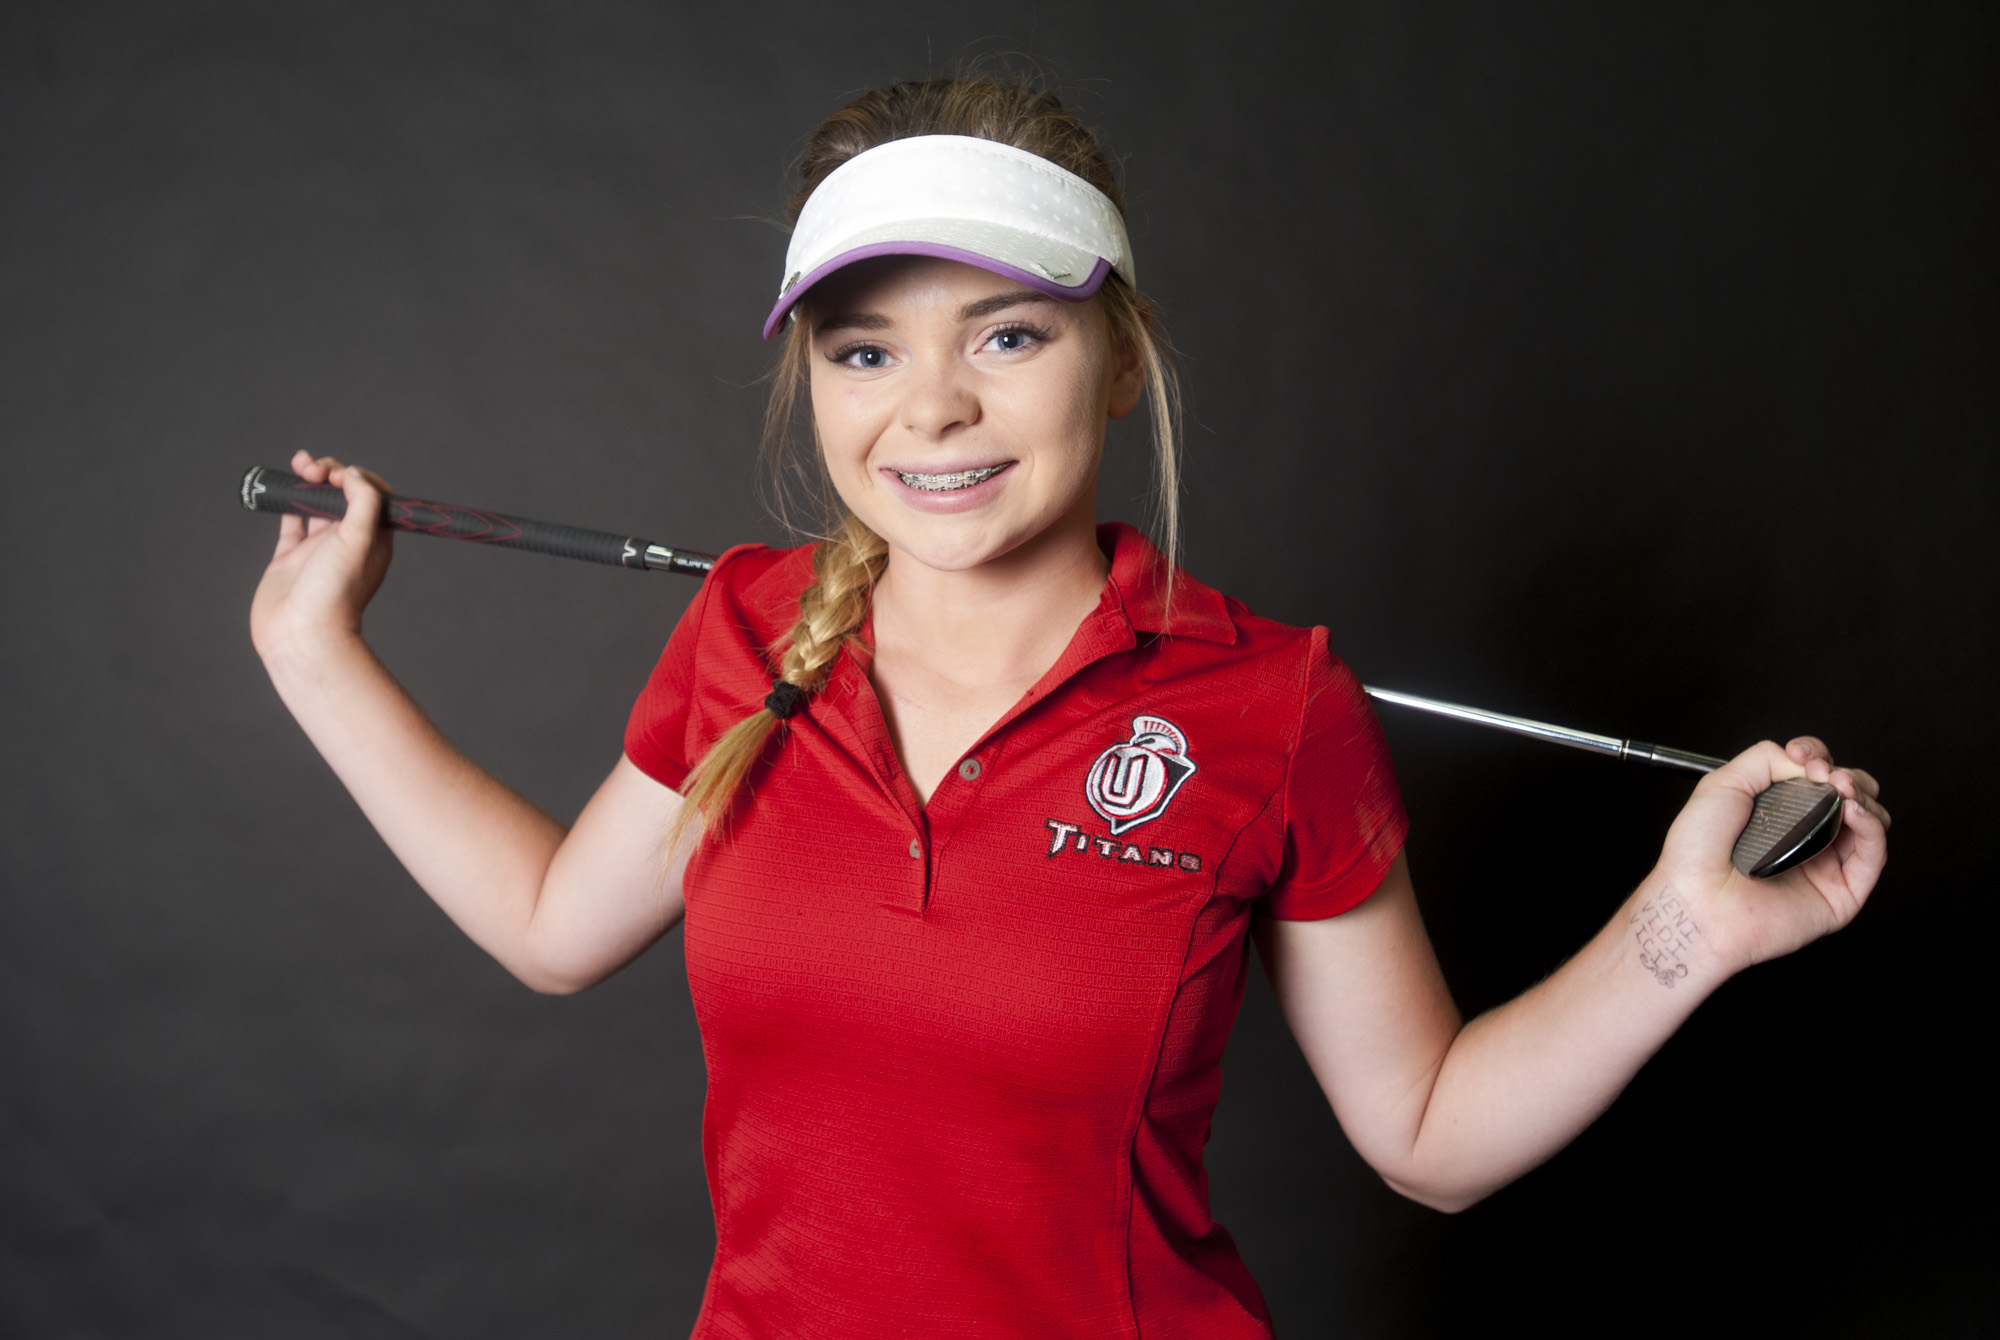 Taylor Hartley of Union is our All-Region girls golfer of the year, seen here, posing for a portrait in Vancouver Tuesday June 7, 2016.